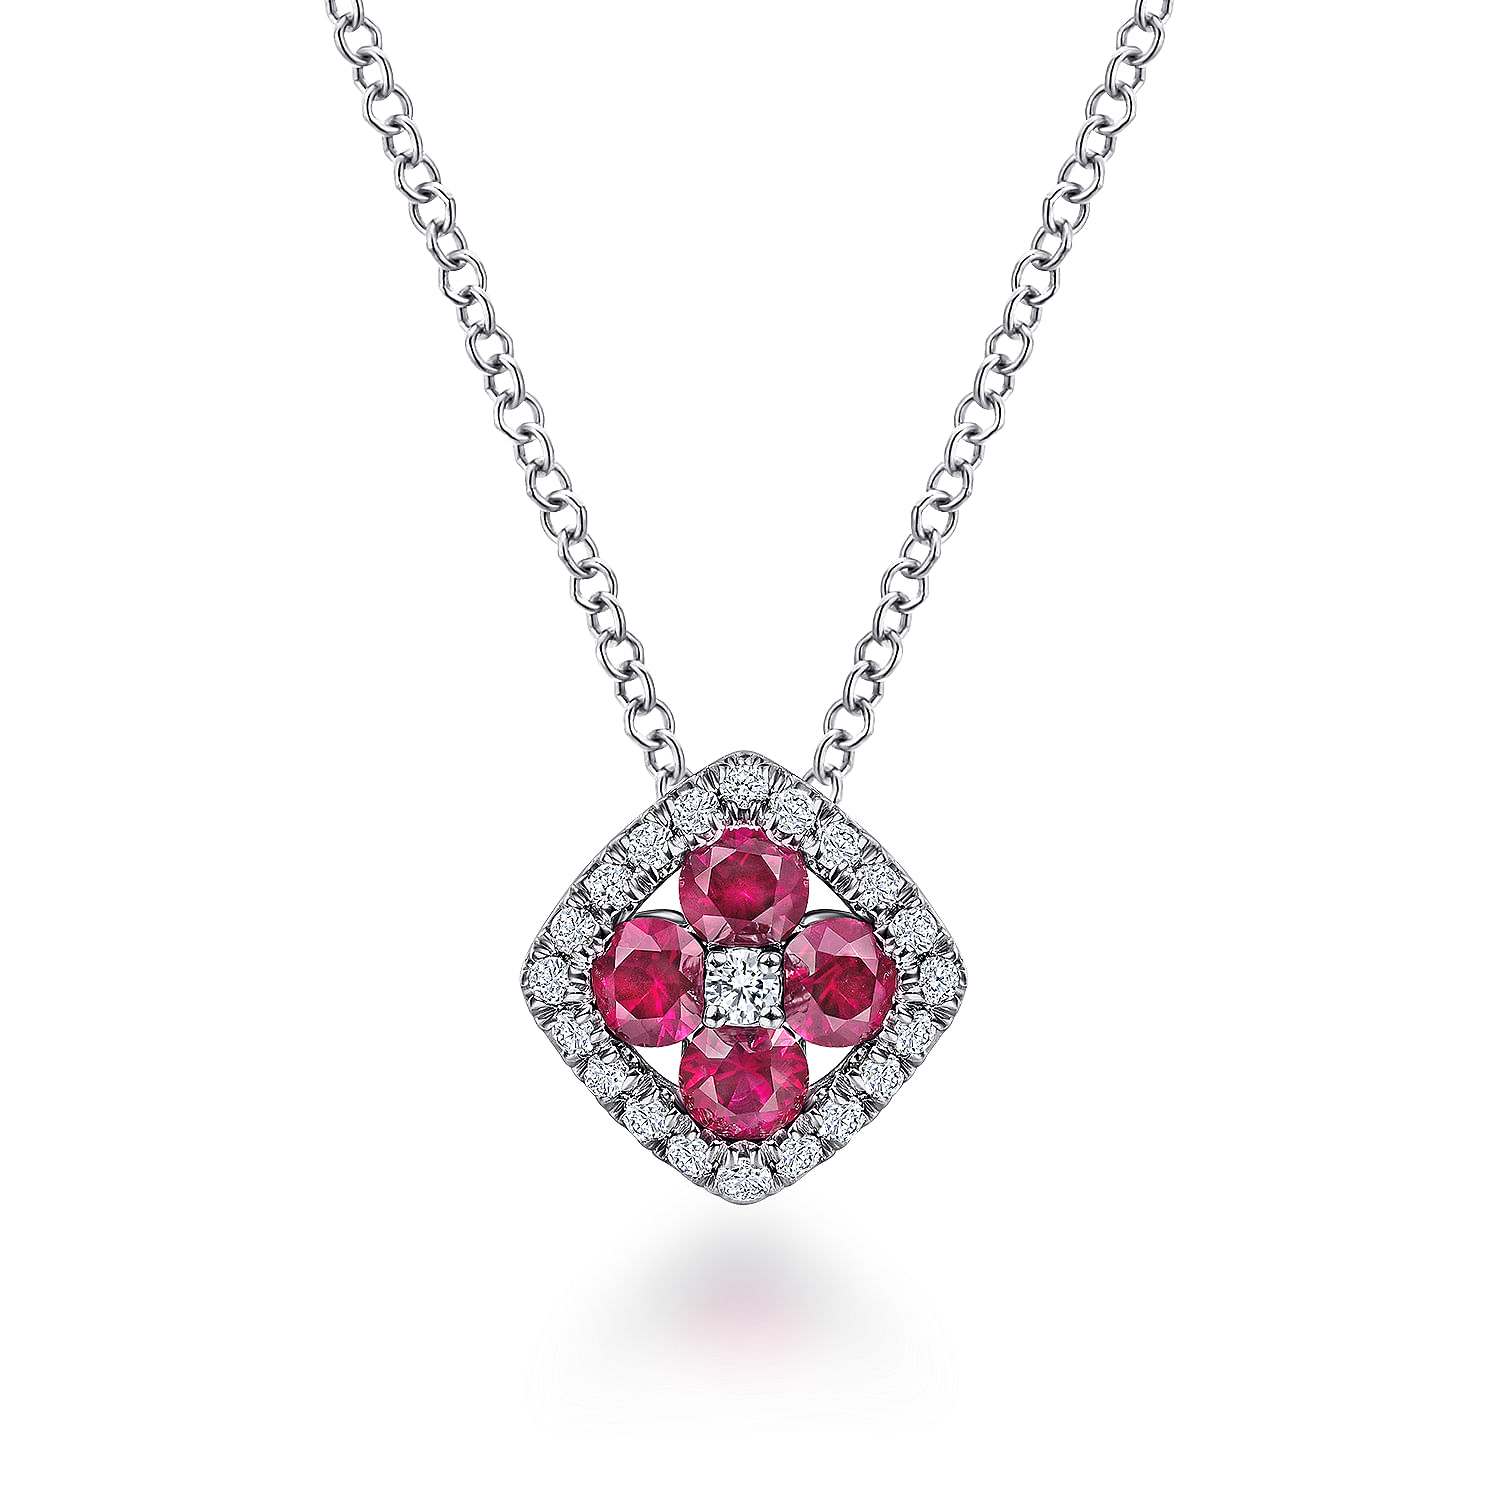 Gabriel - 14K White Gold Ruby and Diamond Halo Floral Pendant Necklace